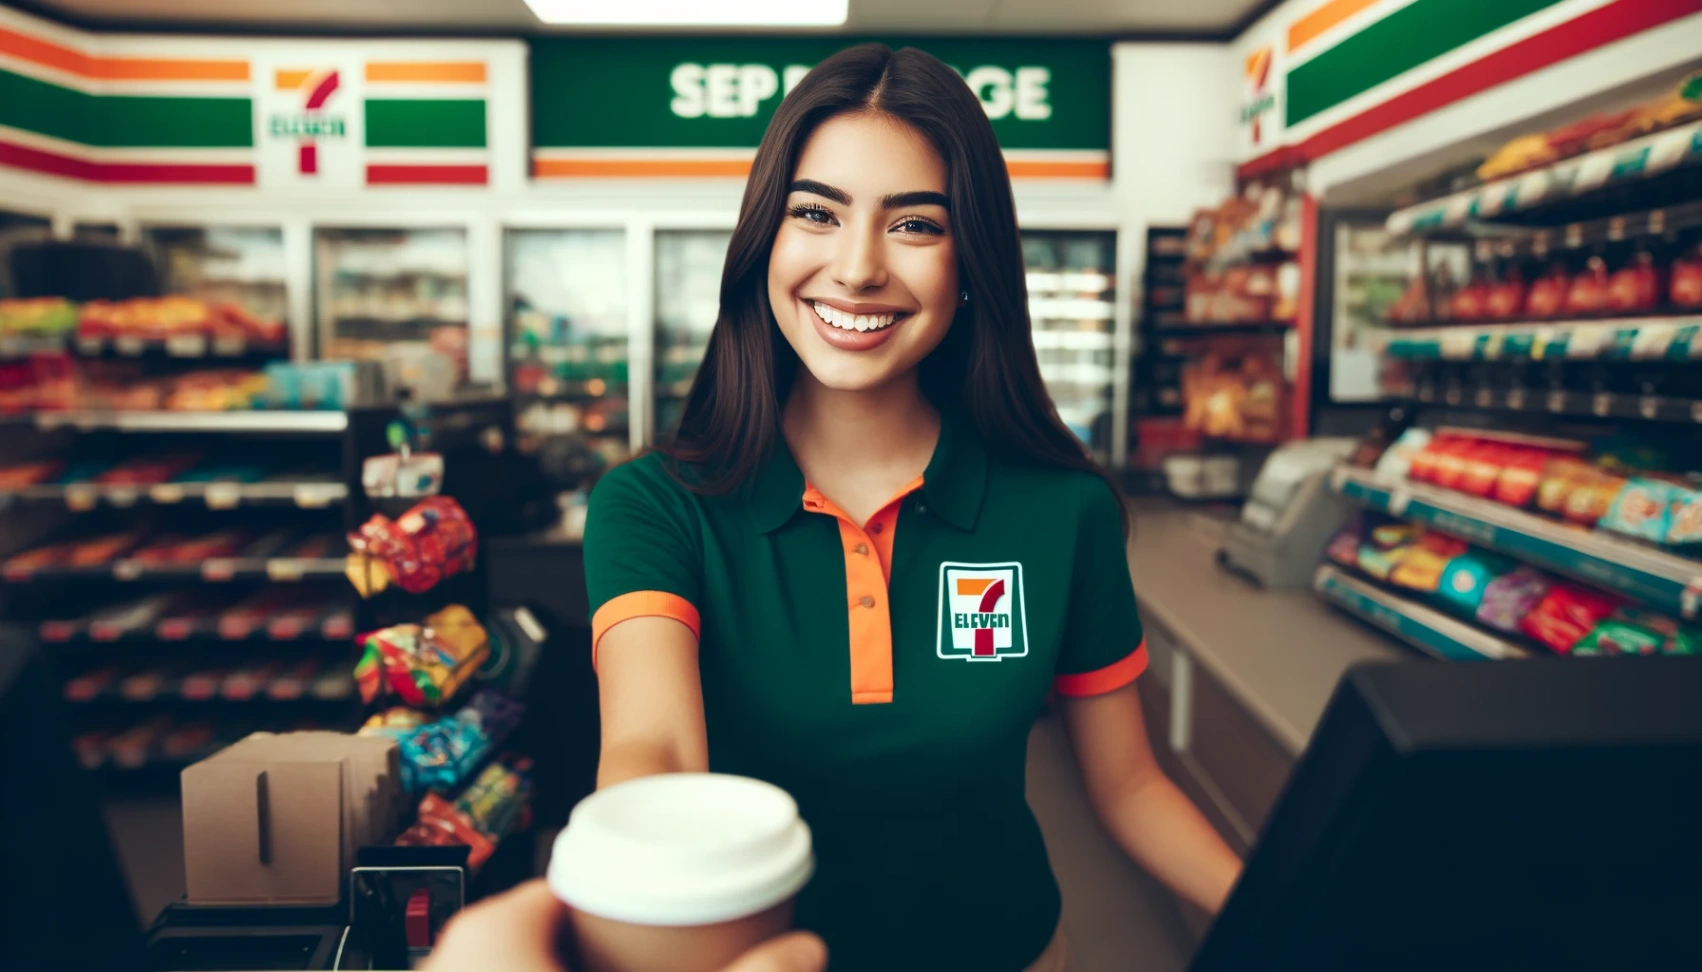 Job Vacancies at 7-Eleven: Learn How to Apply